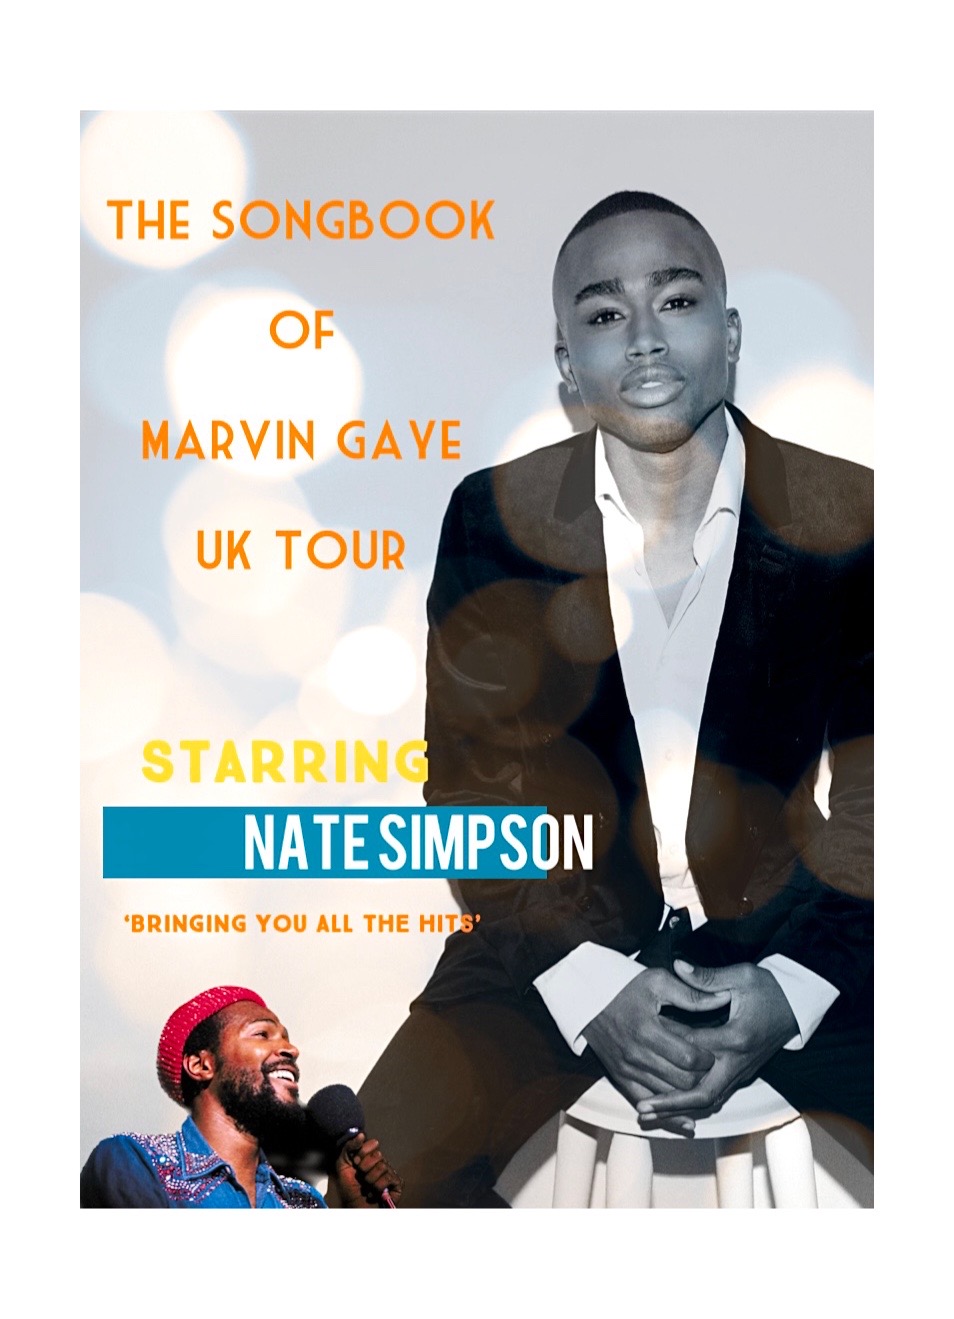 The songbook of Marvin Gaye starring Nate Simpson